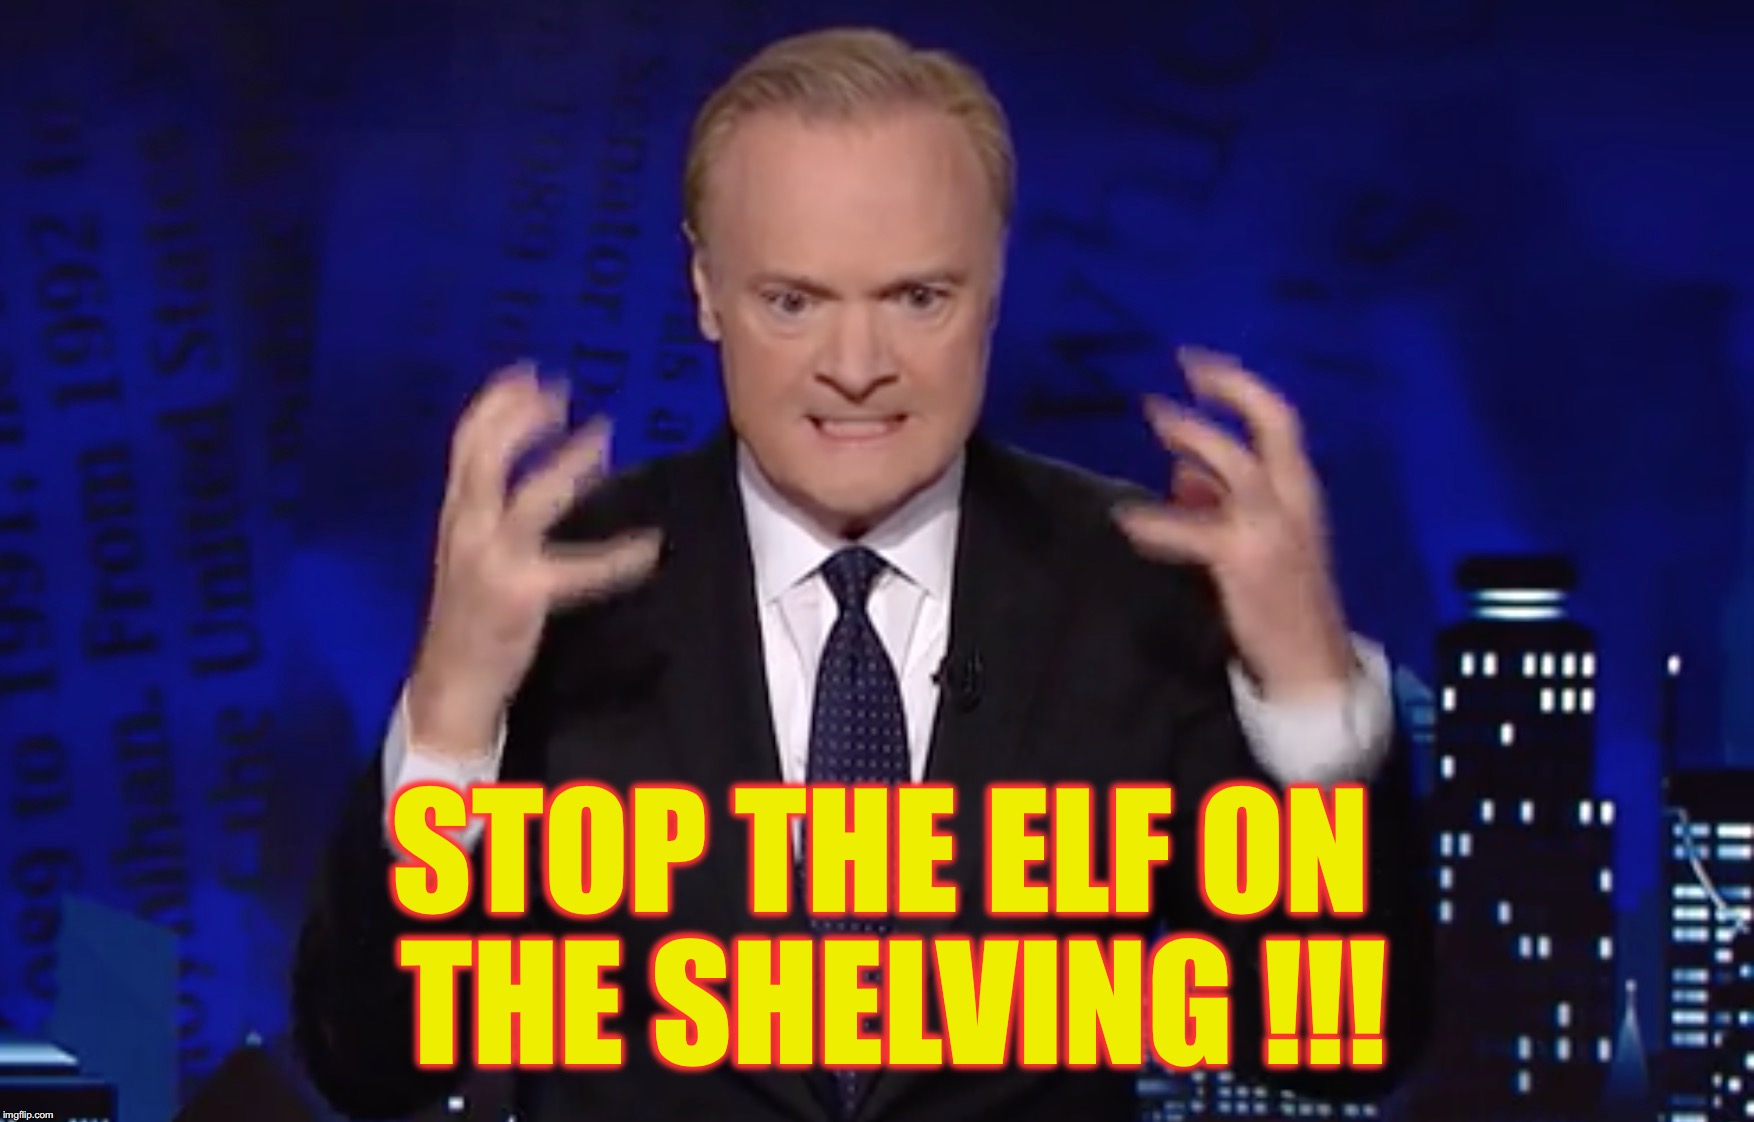 all this 'elf on the shelving' is causing cuckoo for cocoa puffs | STOP THE ELF ON THE SHELVING !!! | image tagged in stop it,msnbc | made w/ Imgflip meme maker